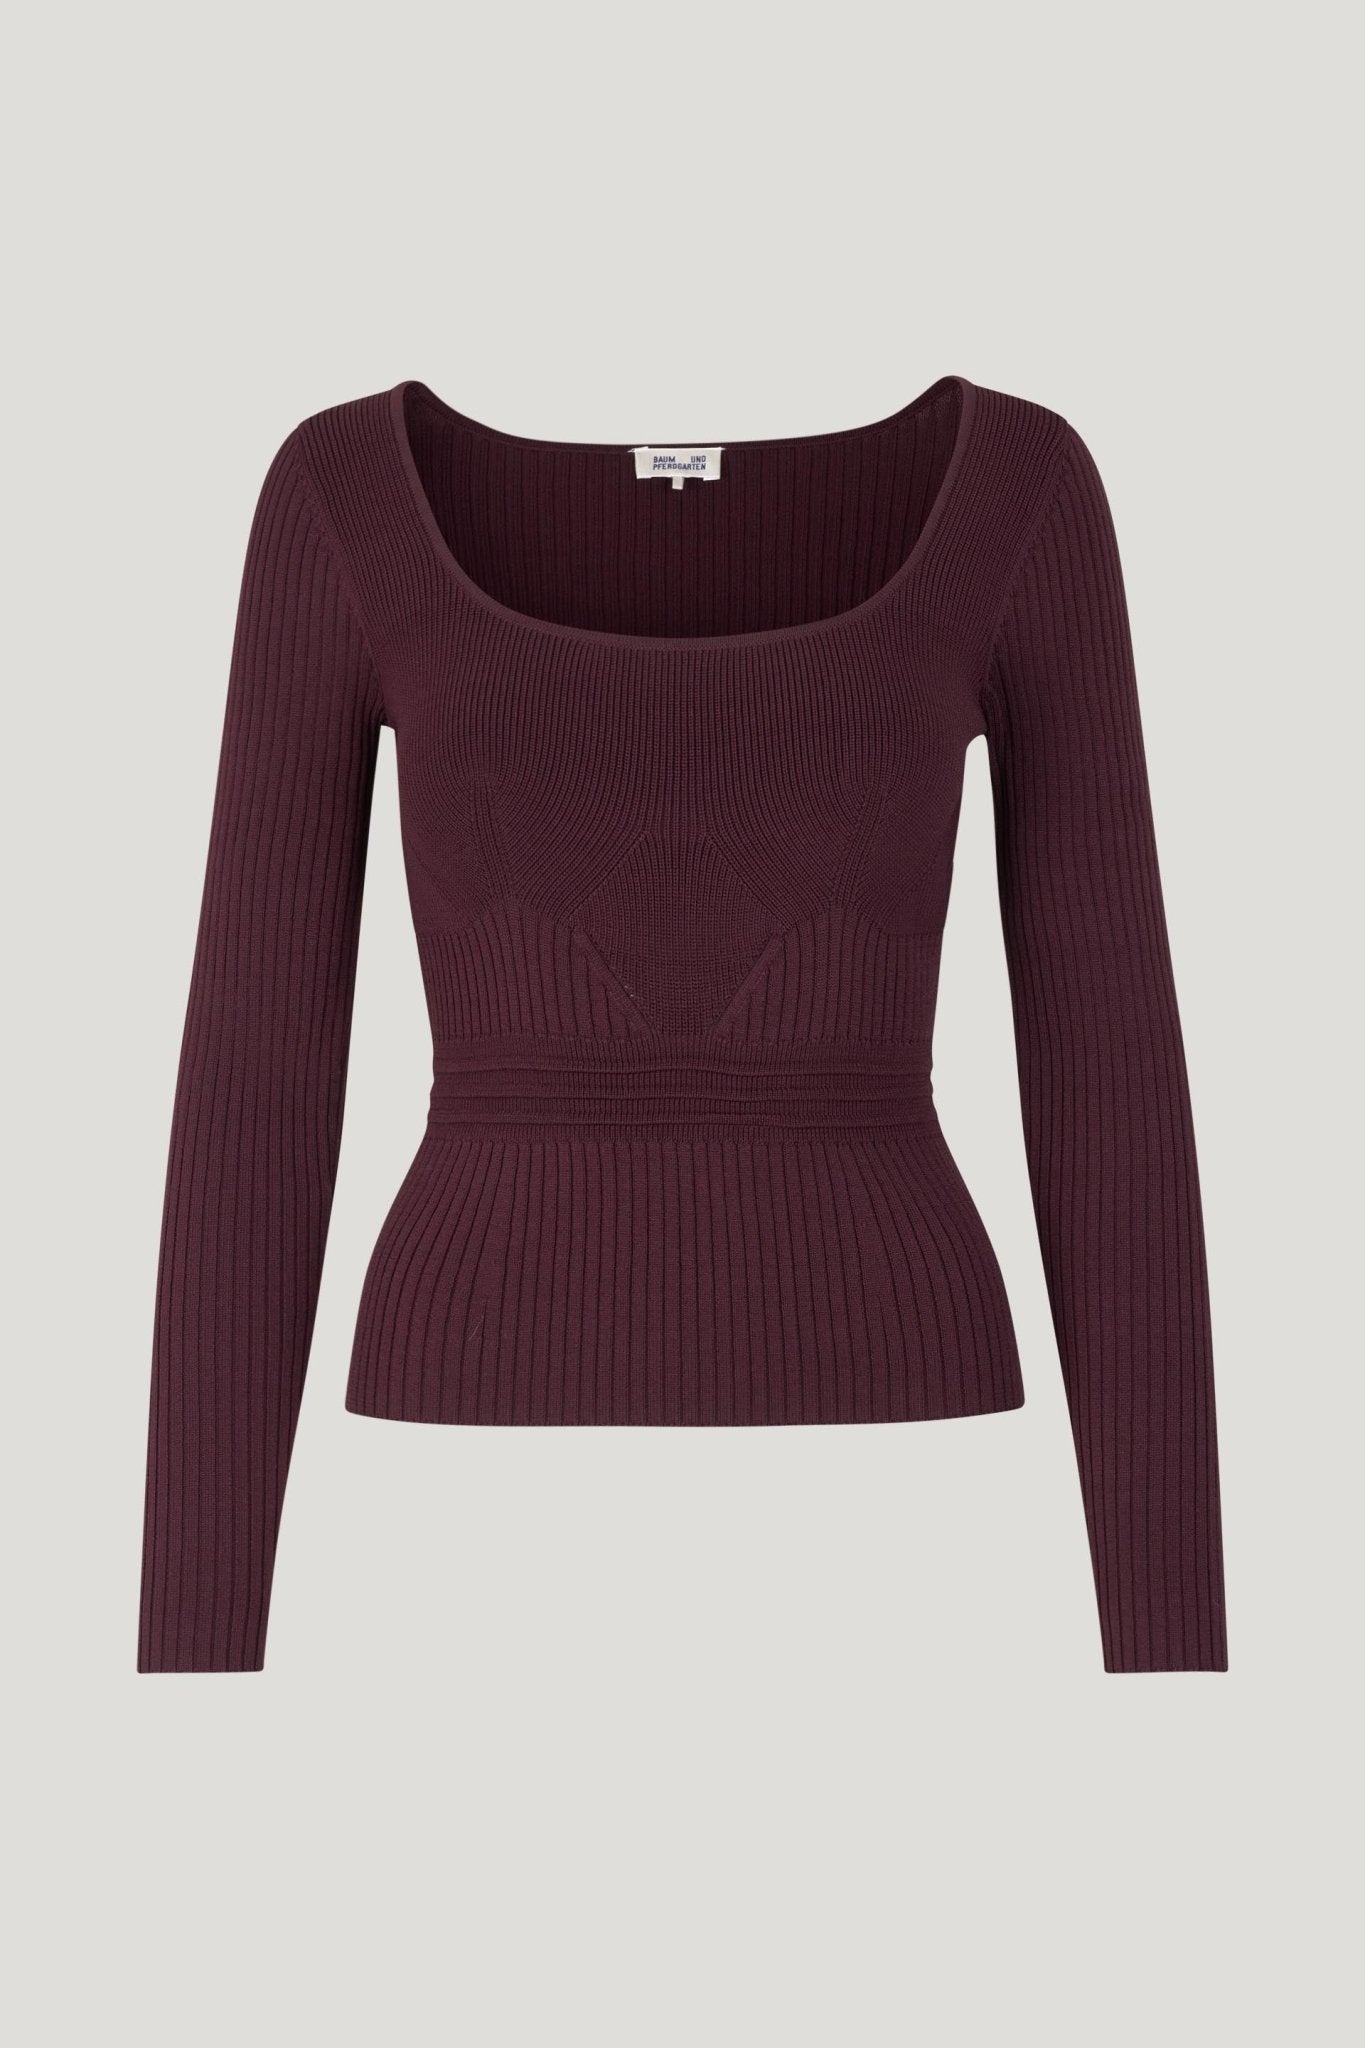 Cambria Sweater - Frock Shop